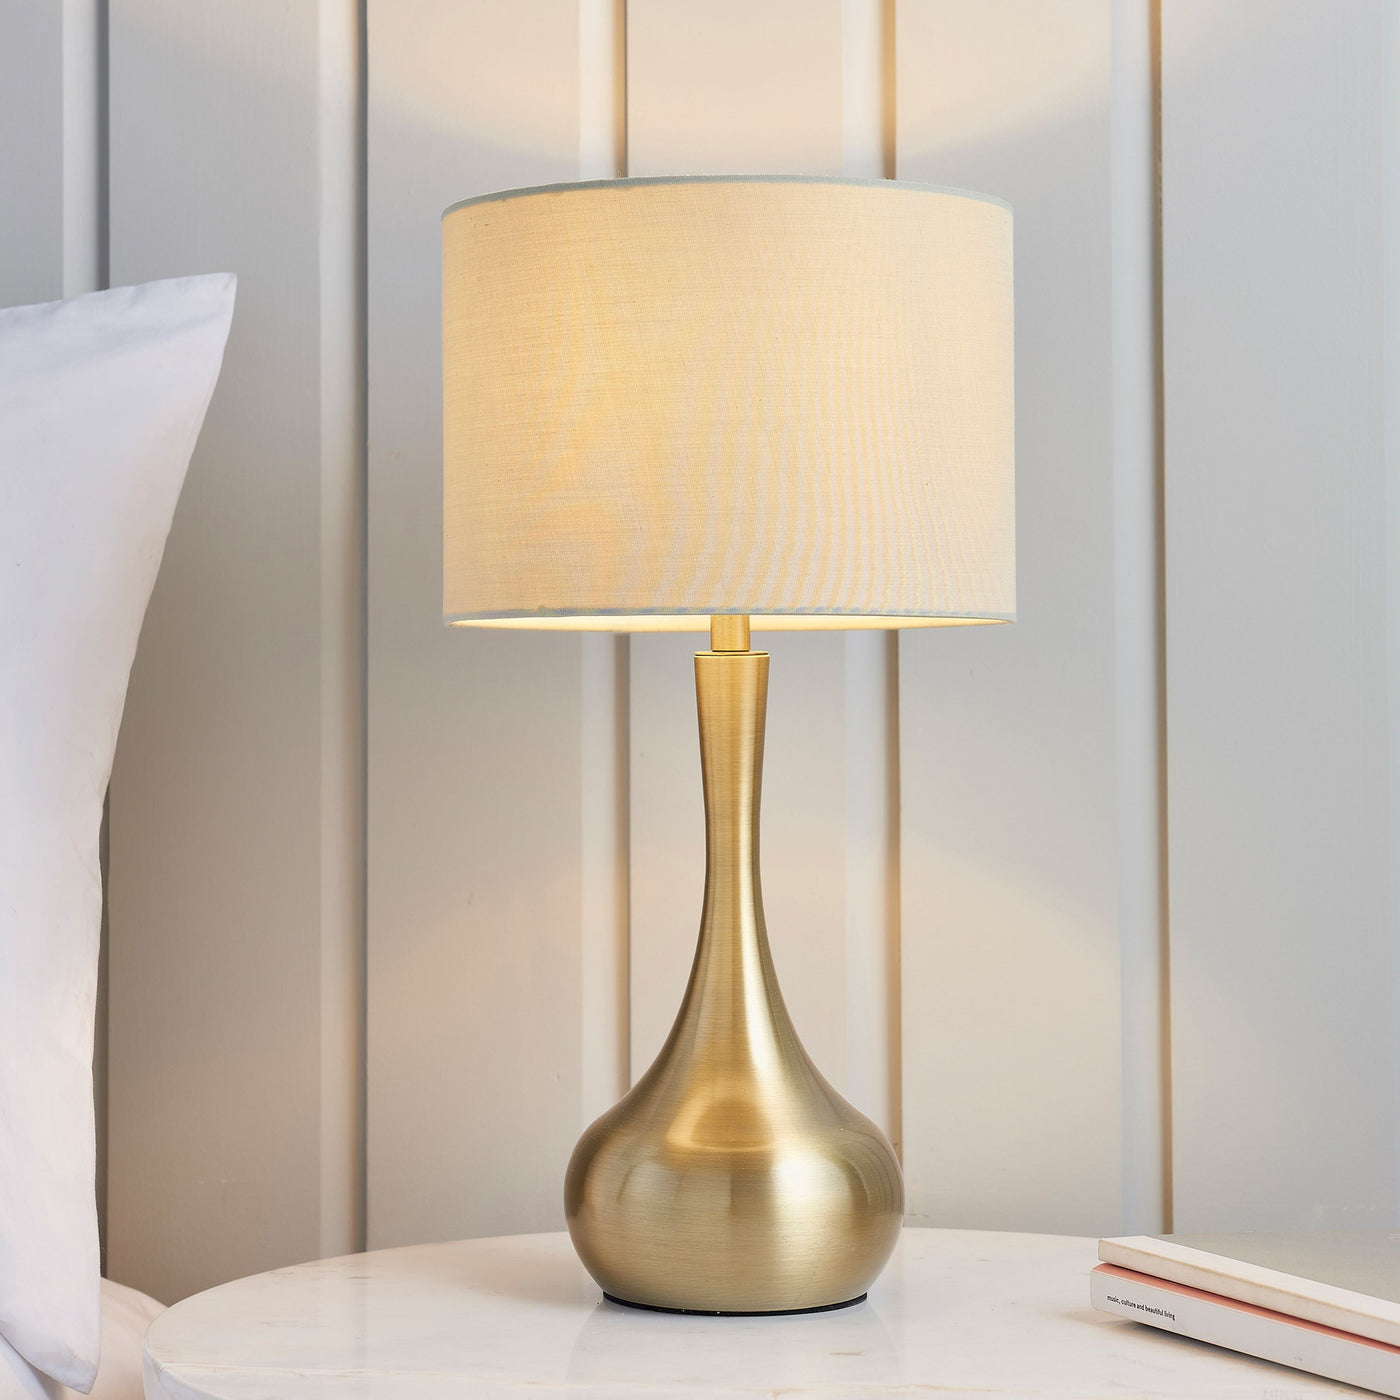 Esher Table Lamp Brass & Taupe